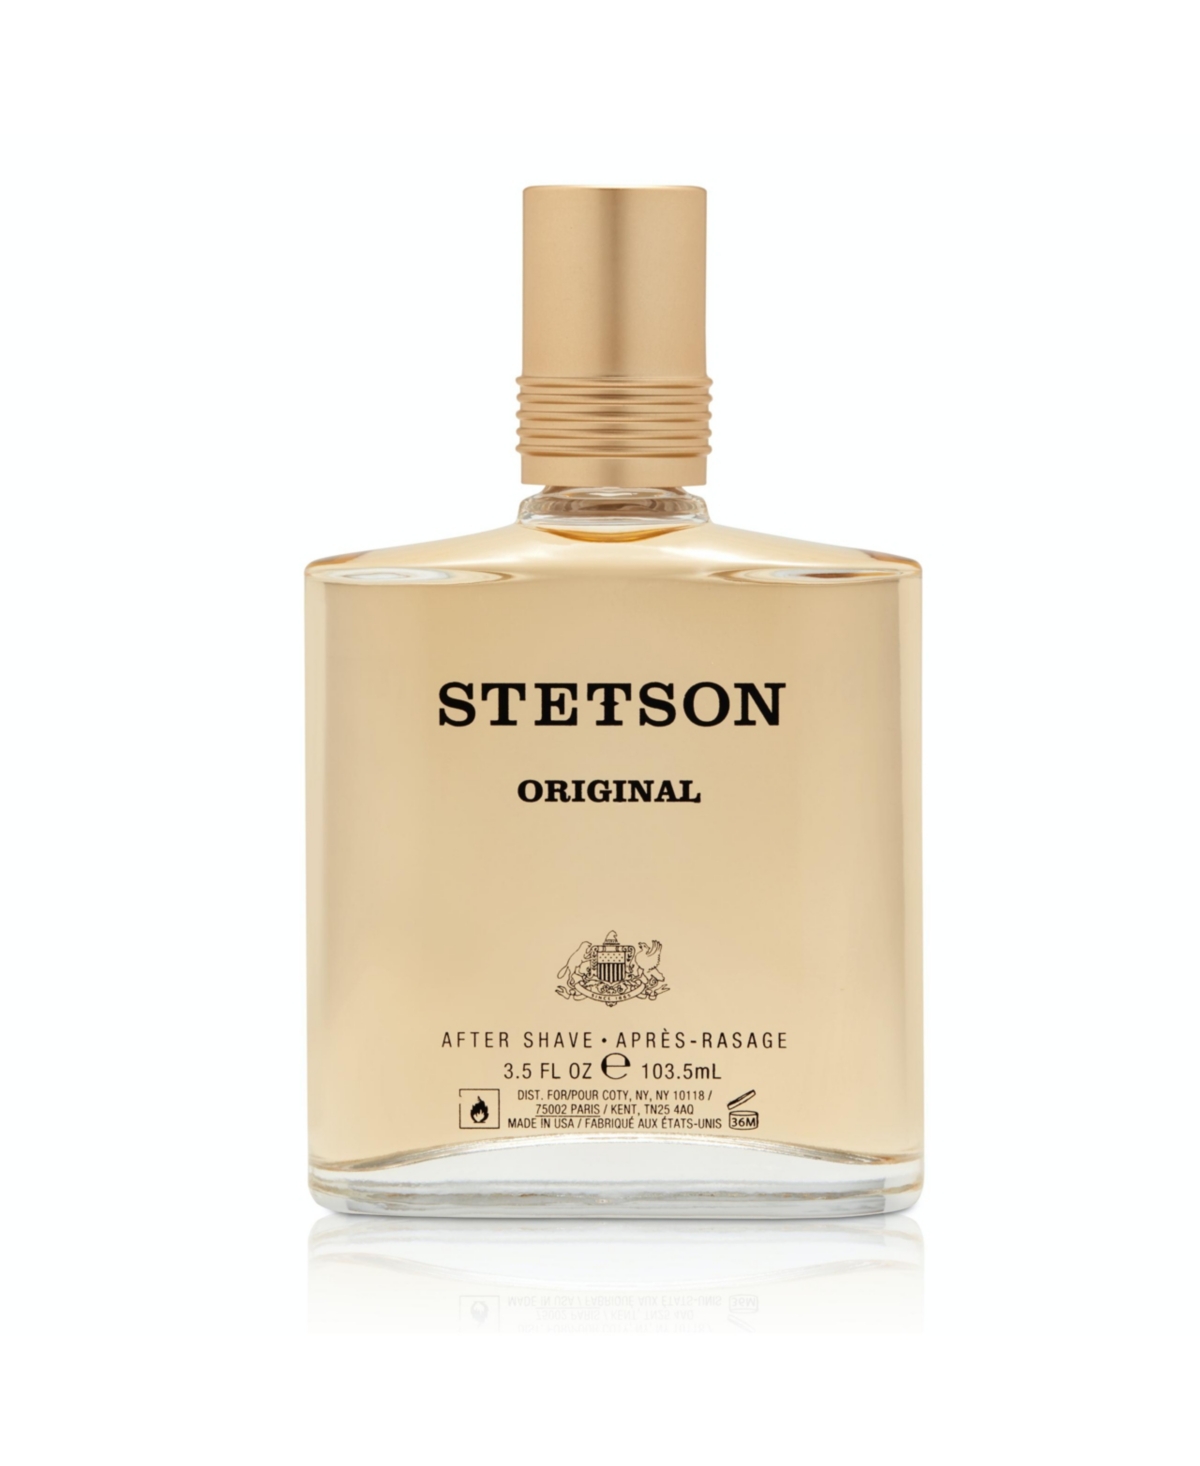 Stetson Original Aftershave by Scent Beauty - After Shave Splash for Men - Earthy and Woody Aroma with Fragrance Notes of Citrus, Patchouli, and Tonka